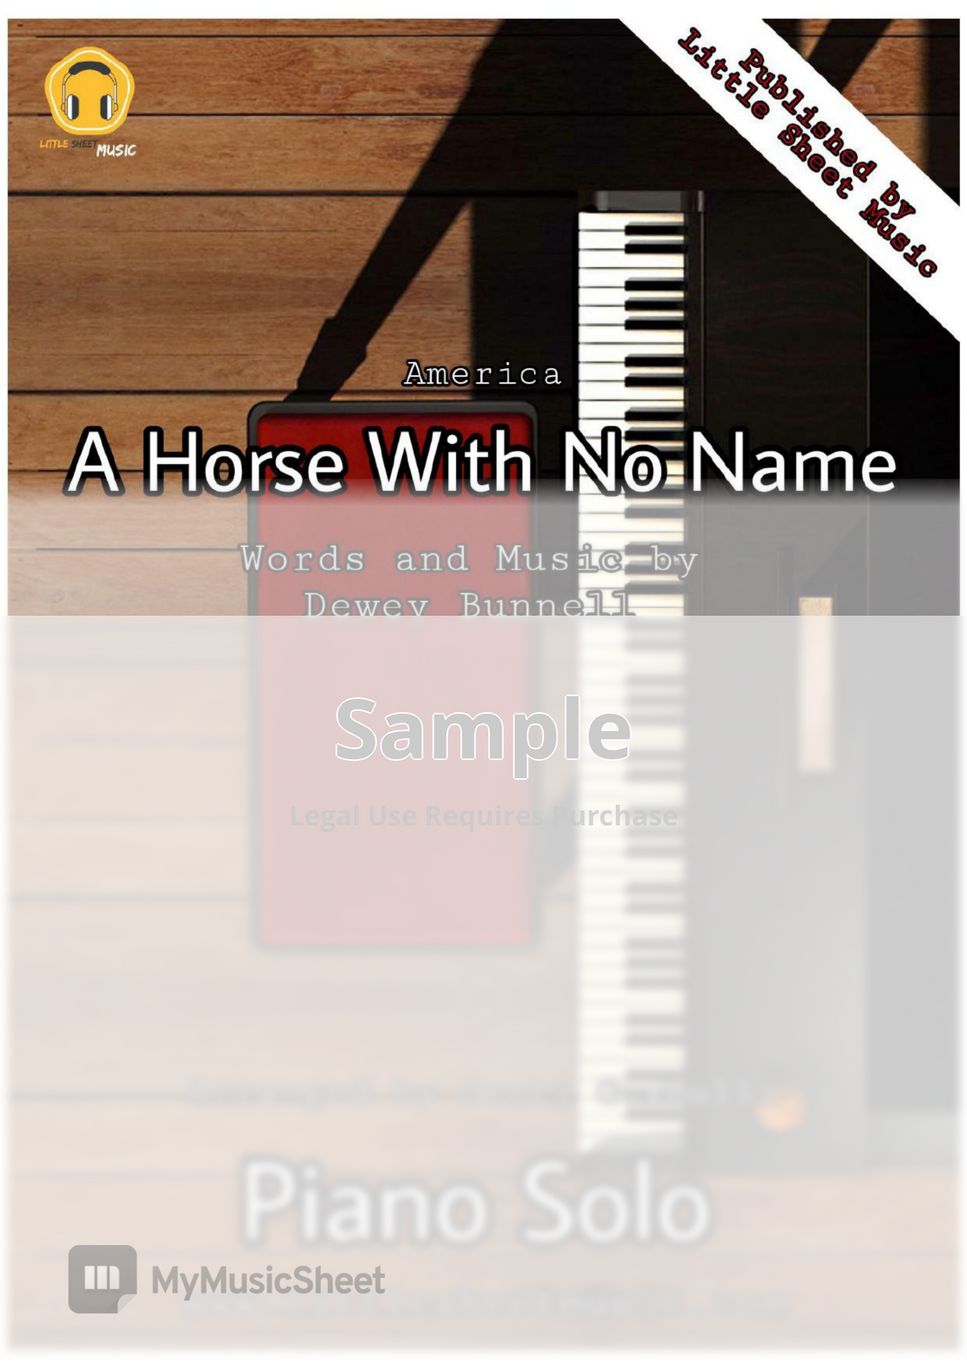 America's A Horse With No Name: The Meaning Behind The Song